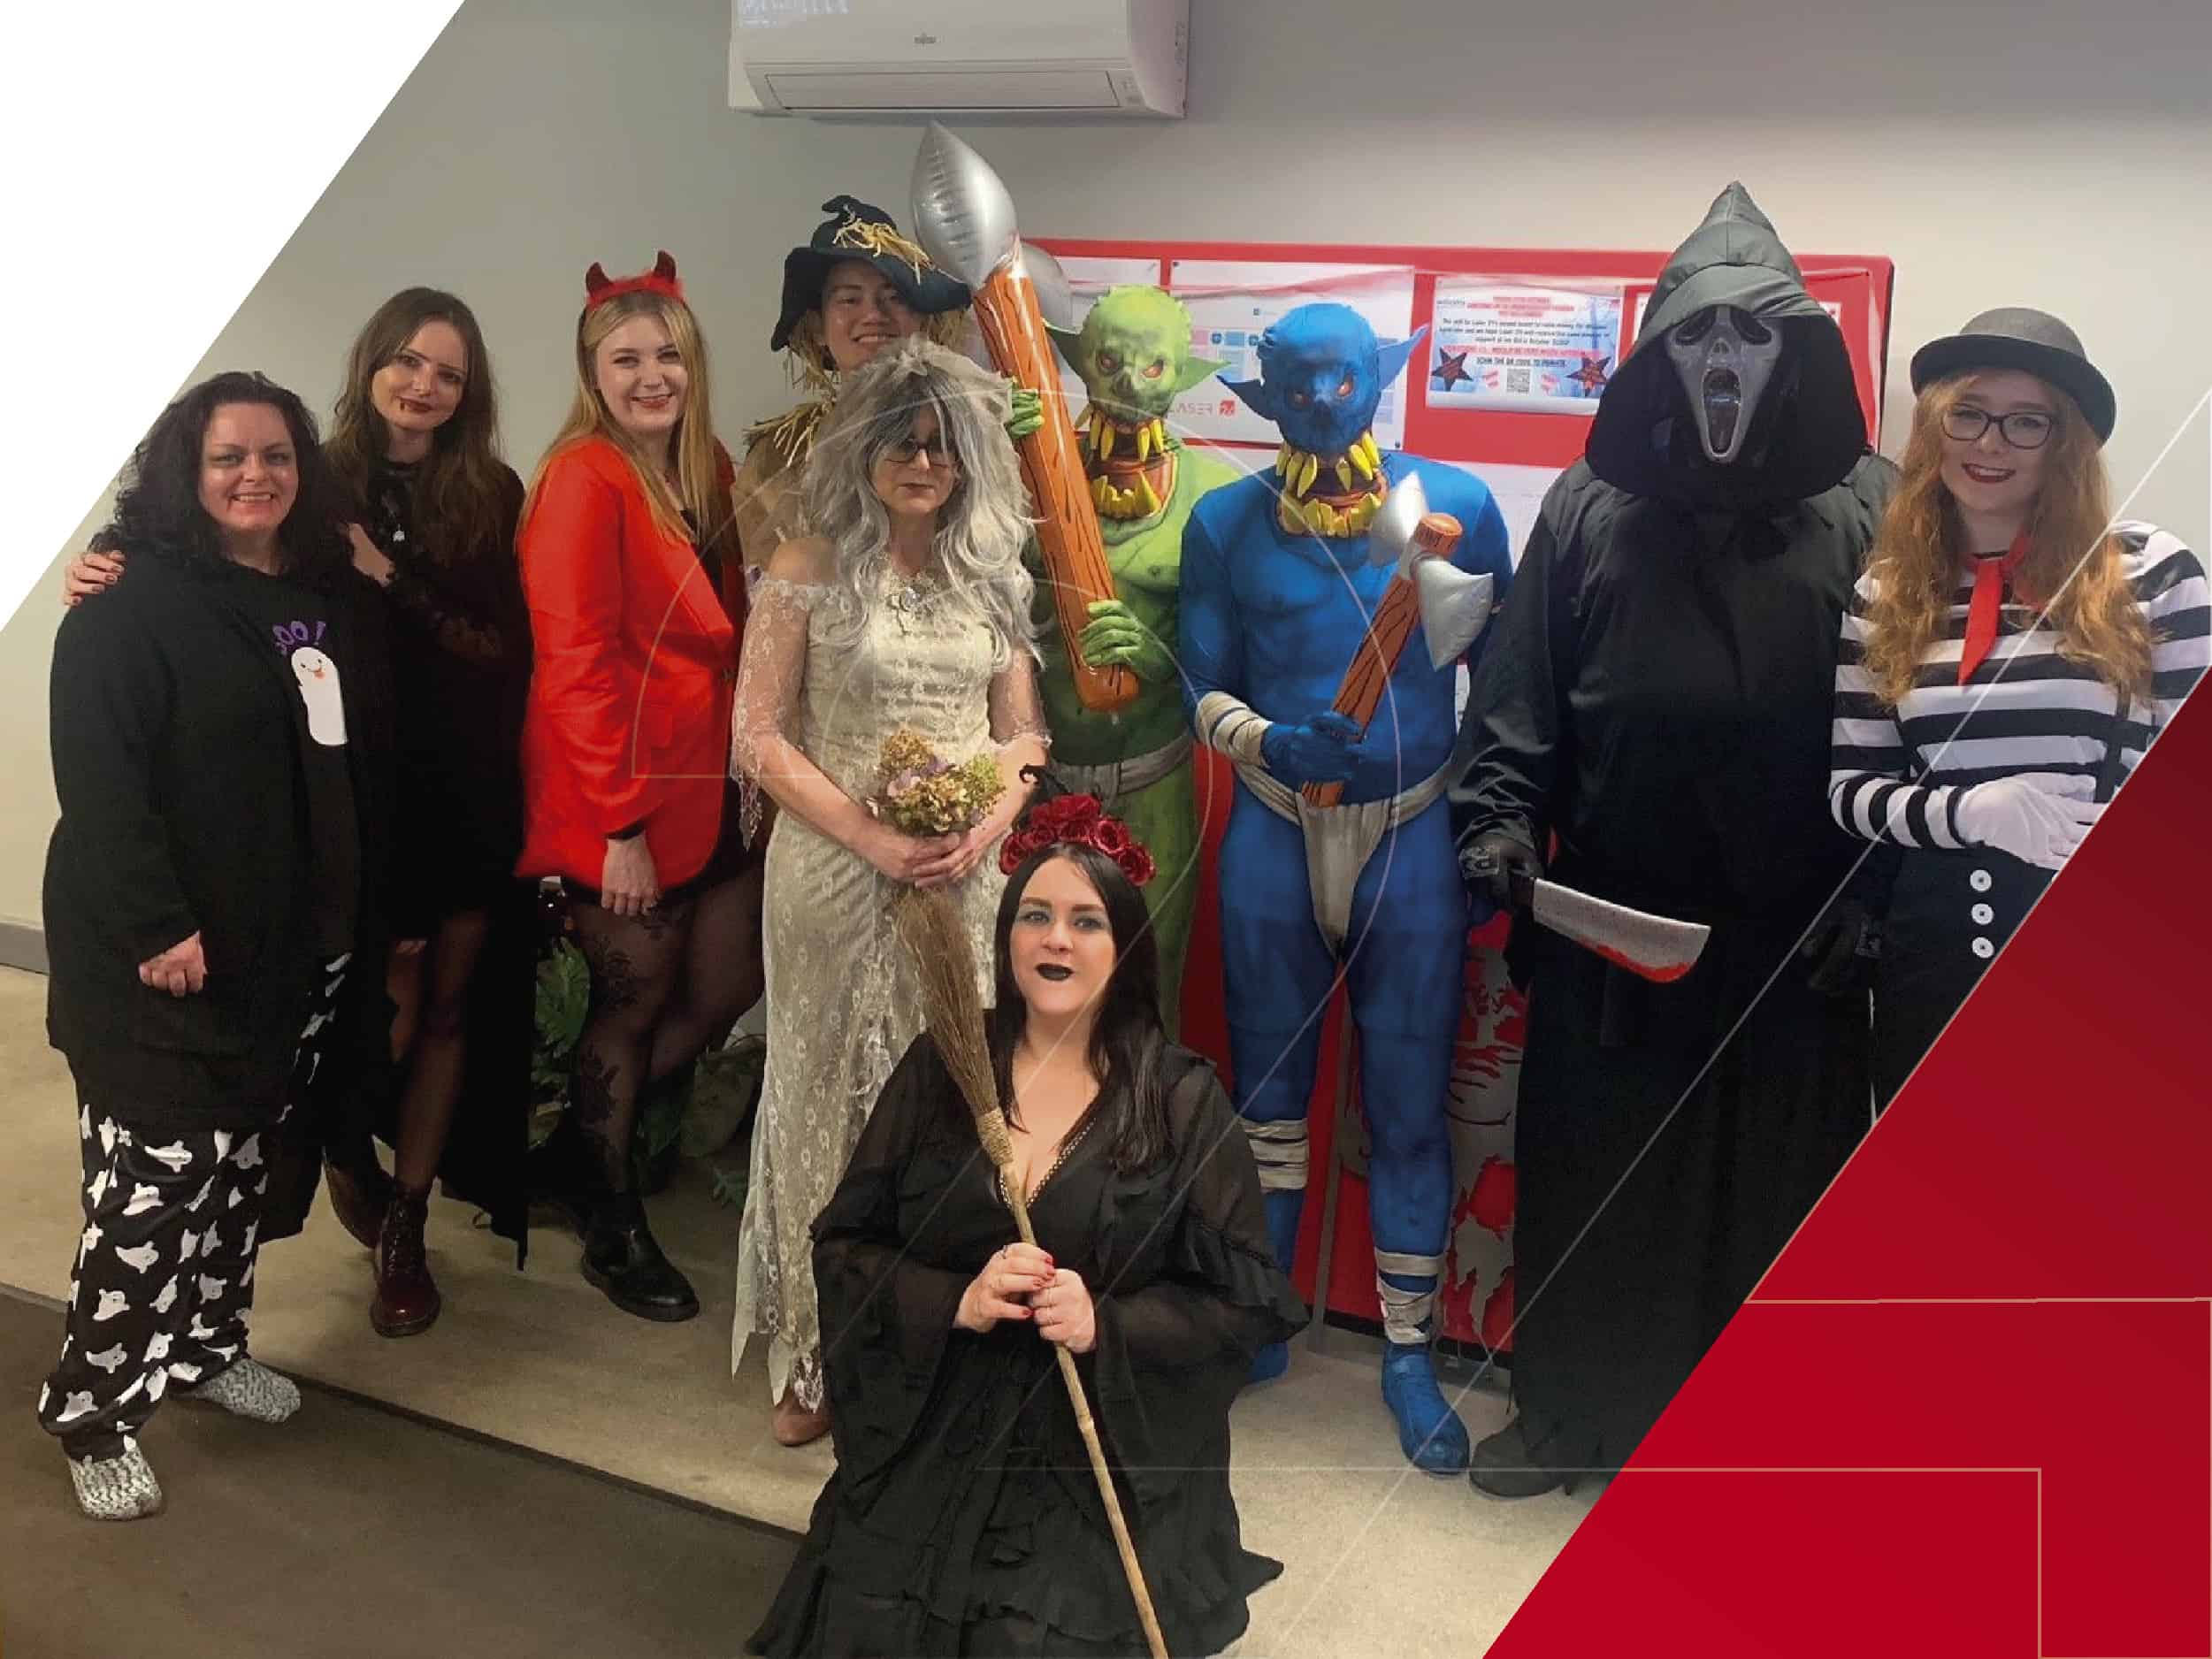 Laser 24 team dressed spooky for halloween to raise money for charity